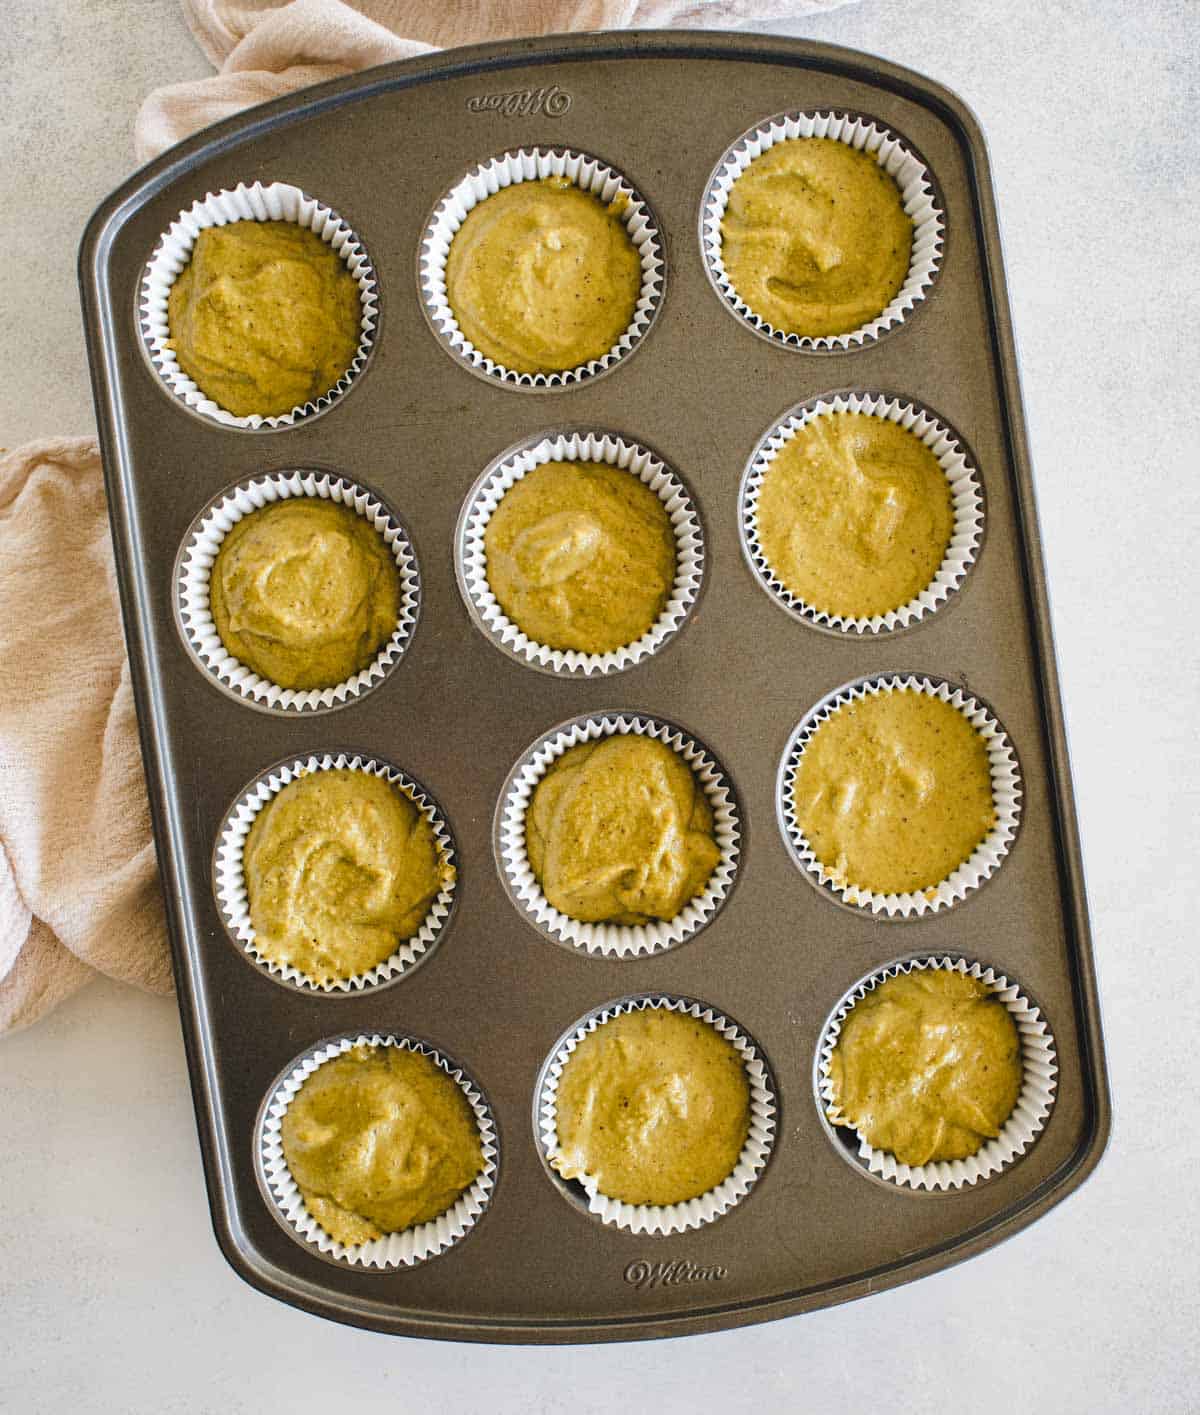 Unbaked green muffin batter in muffin tray